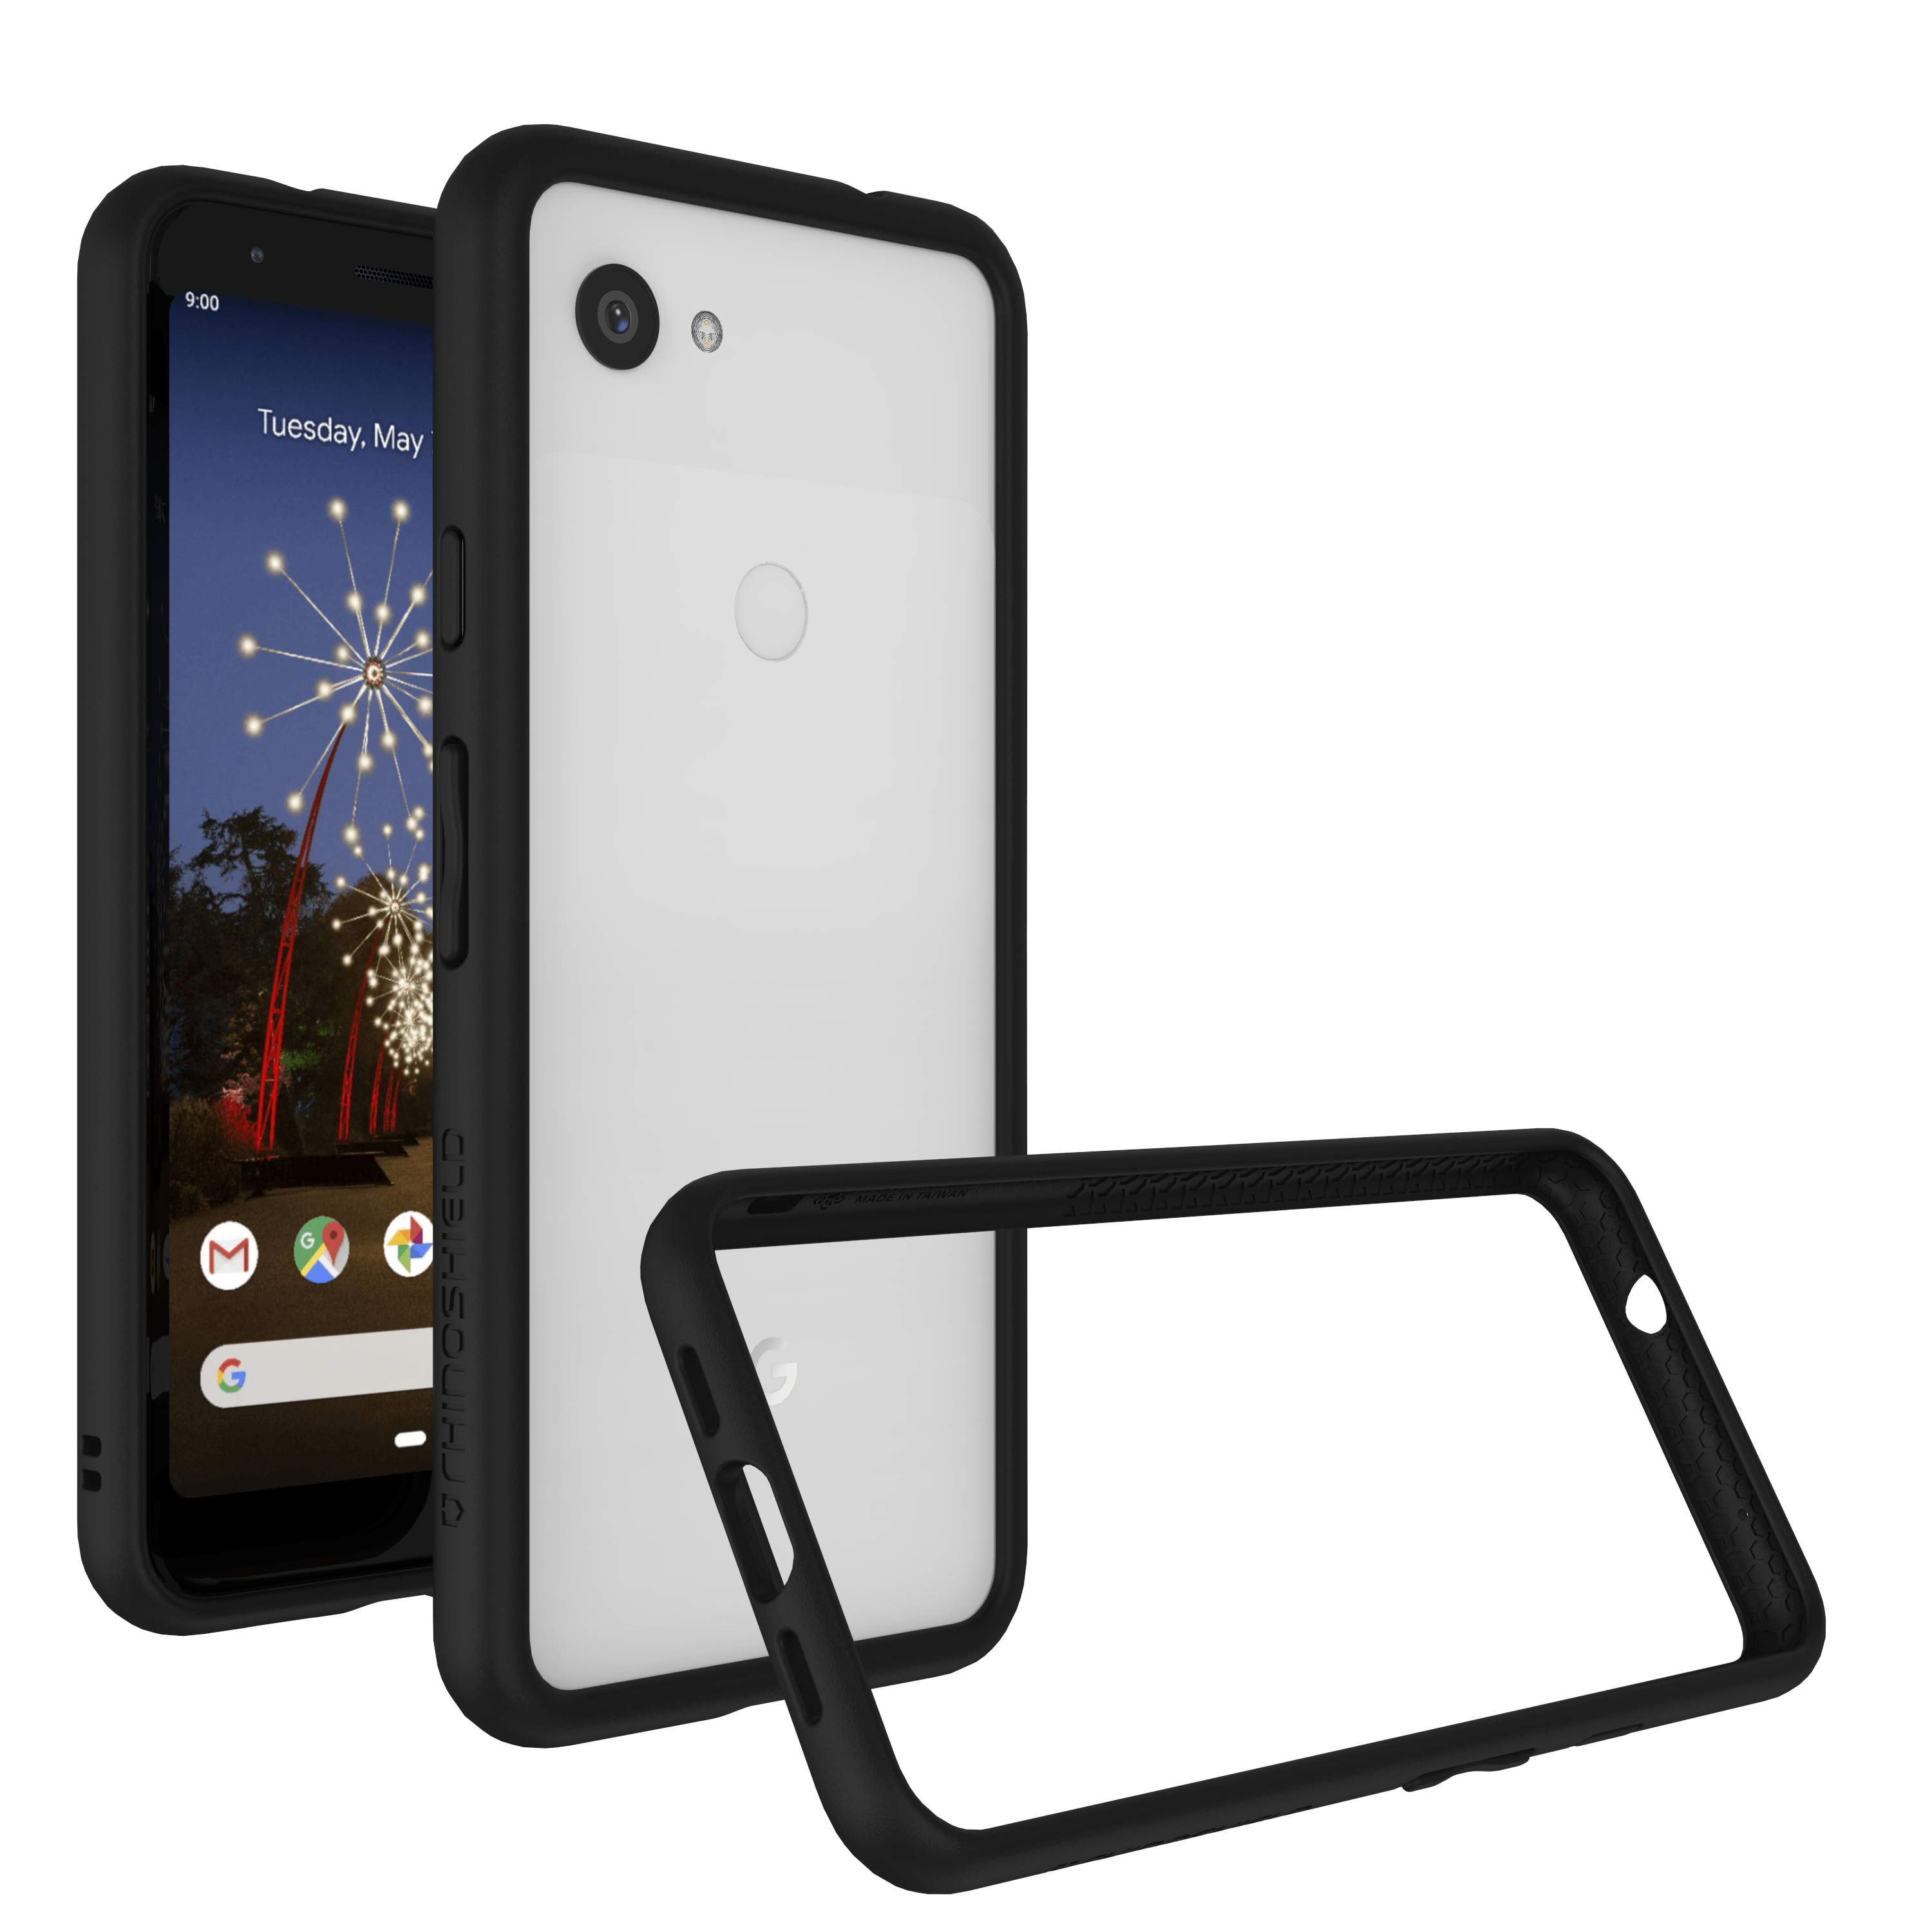 Android Google Pixel Phone Free PNG Image